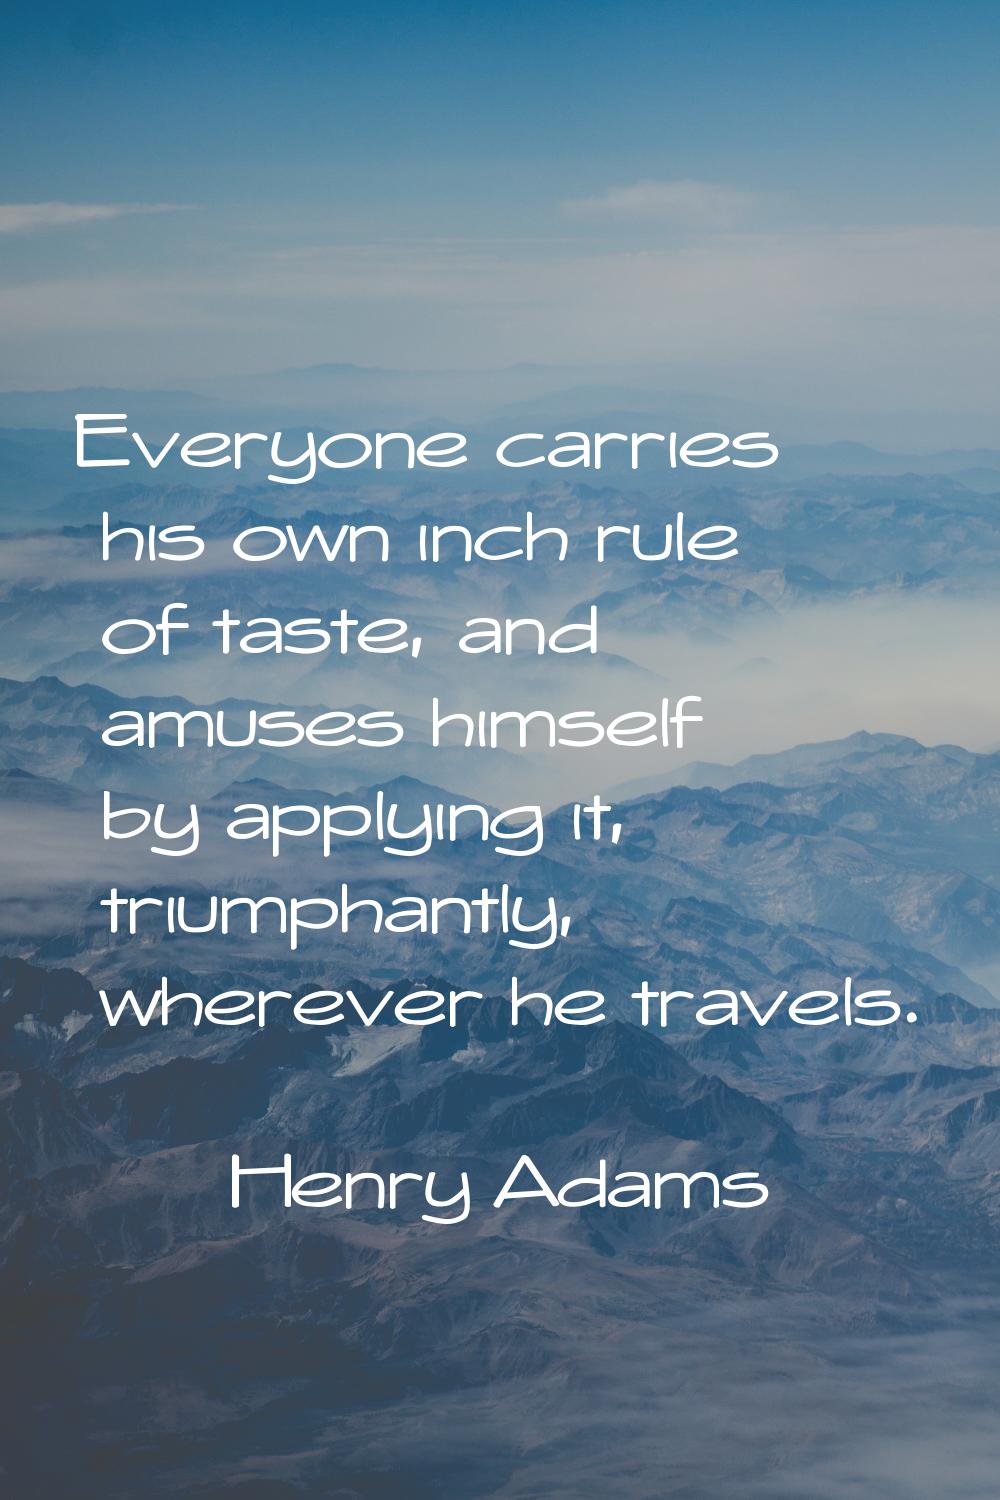 Everyone carries his own inch rule of taste, and amuses himself by applying it, triumphantly, where